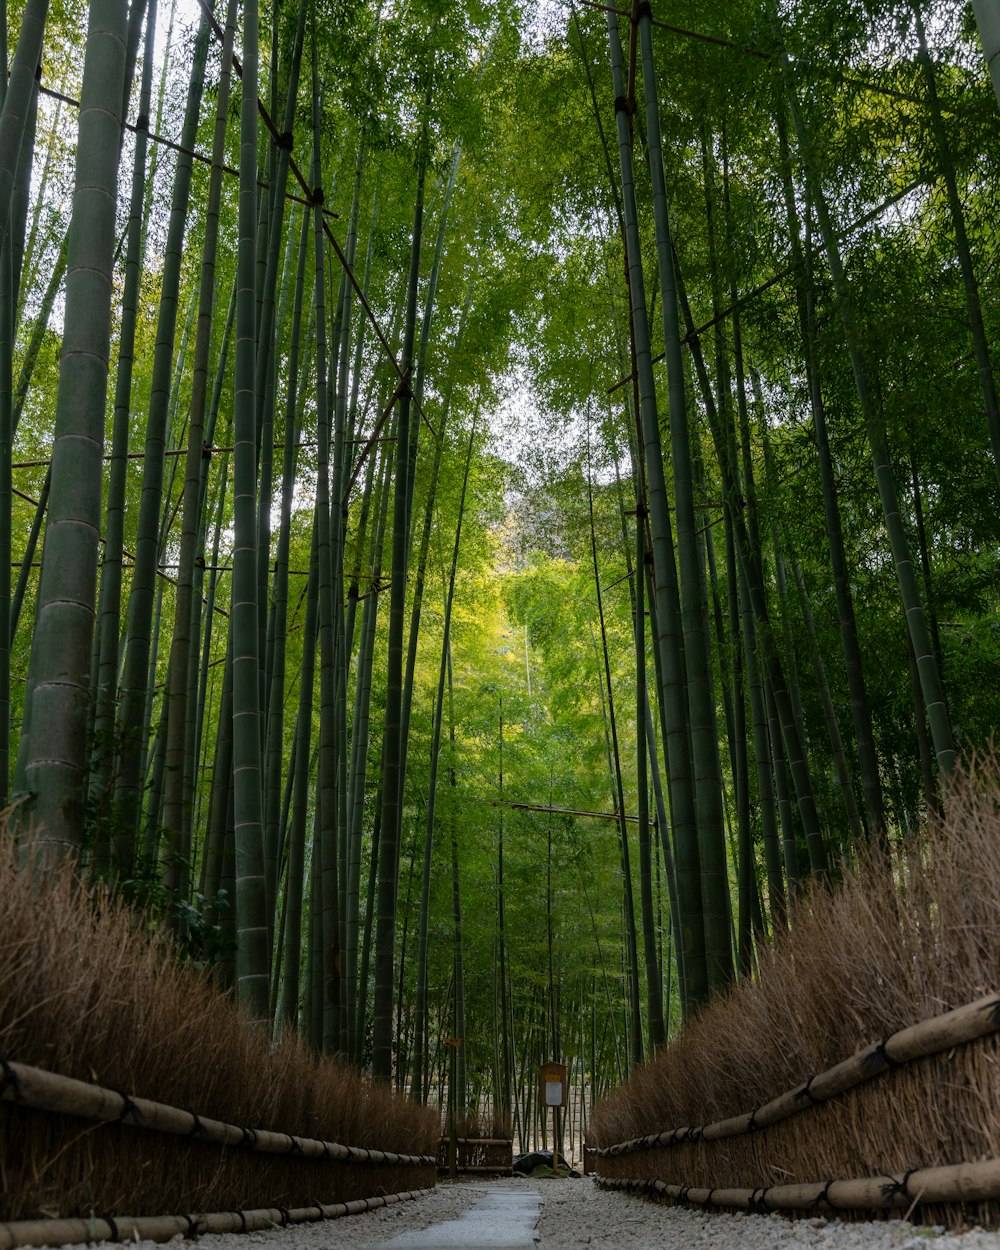 a dirt road surrounded by tall bamboo trees